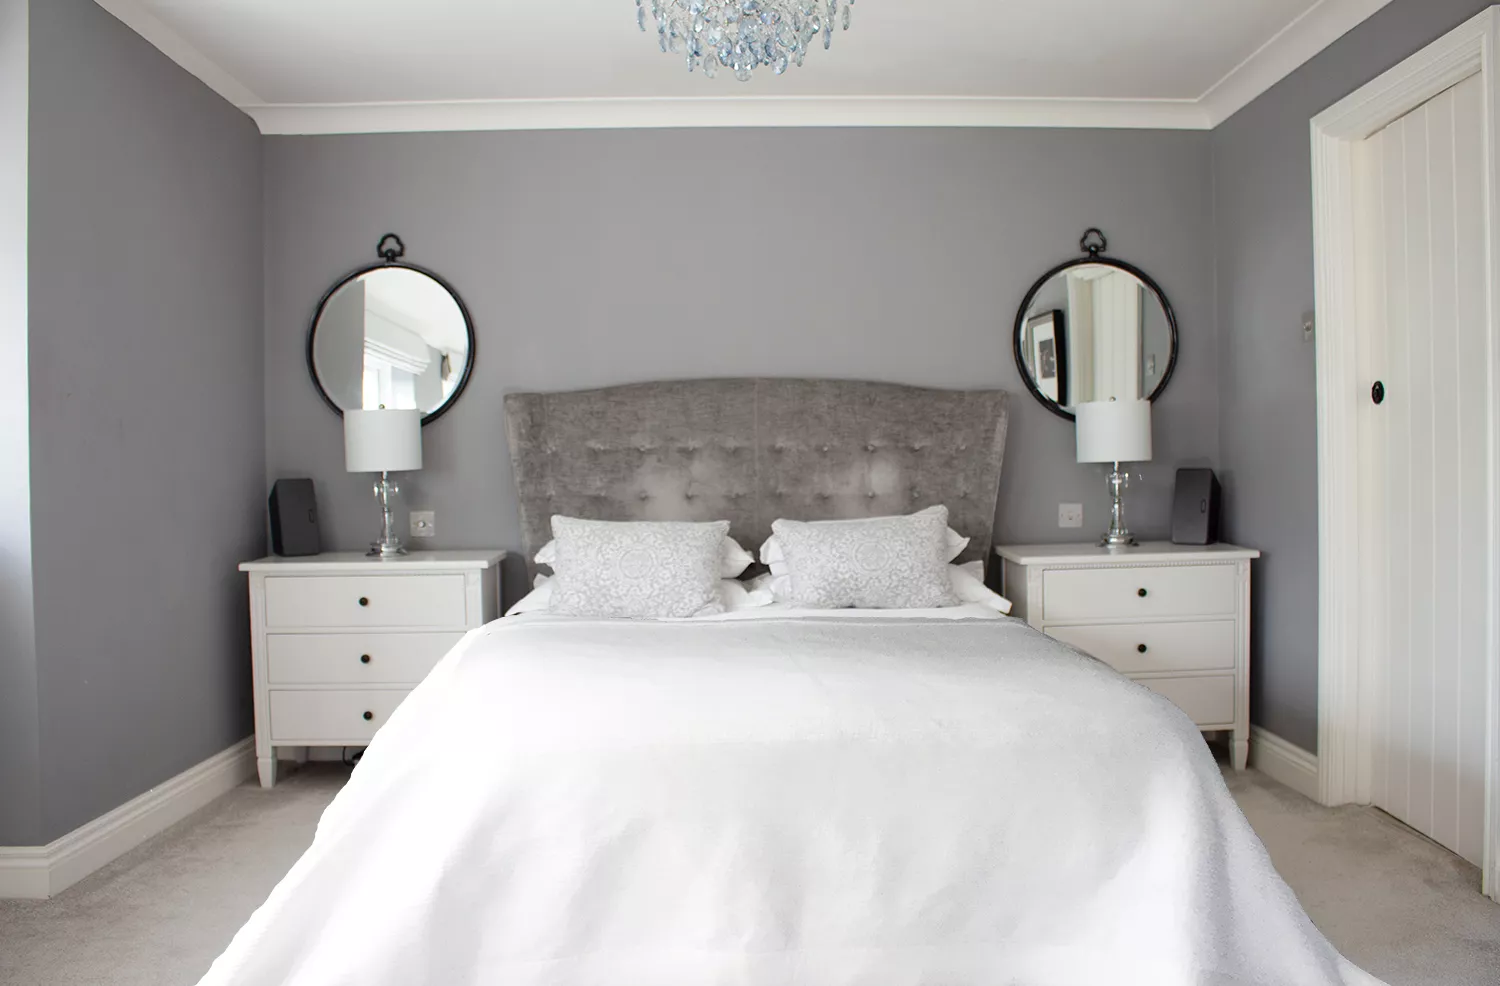 A photo of a grey painted bedroom with a white ceiling.